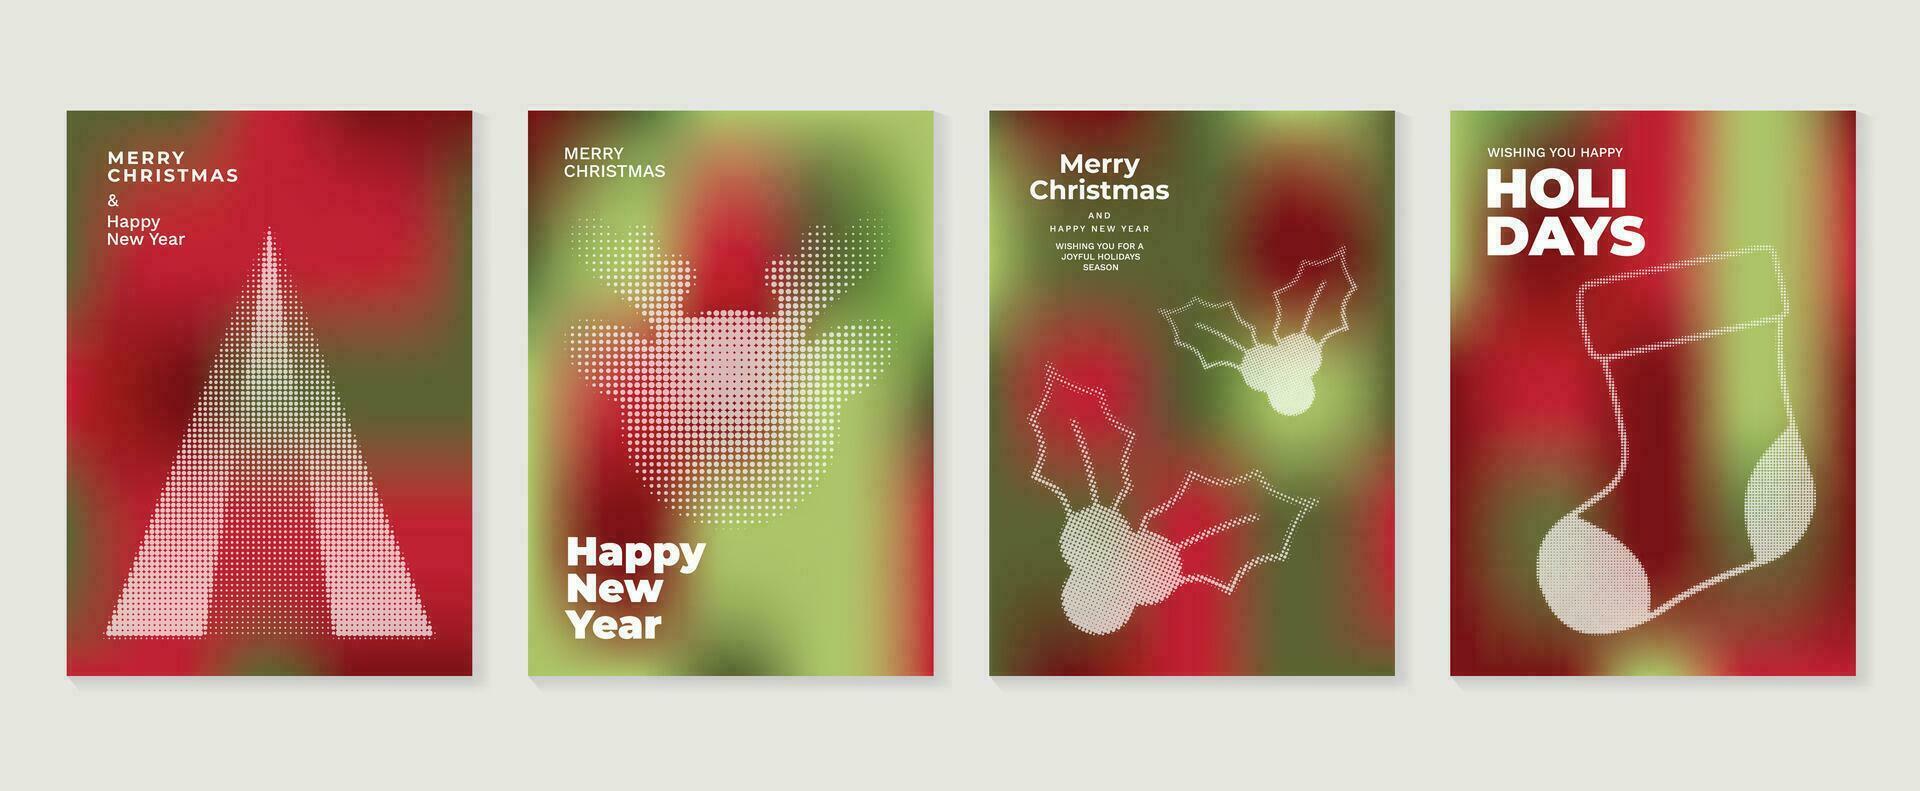 Merry christmas concept posters set. Cute gradient holographic background vector with vibrant color, christmas tree, reindeer, sock. Art trendy wallpaper design for social media, card, banner, flyer.